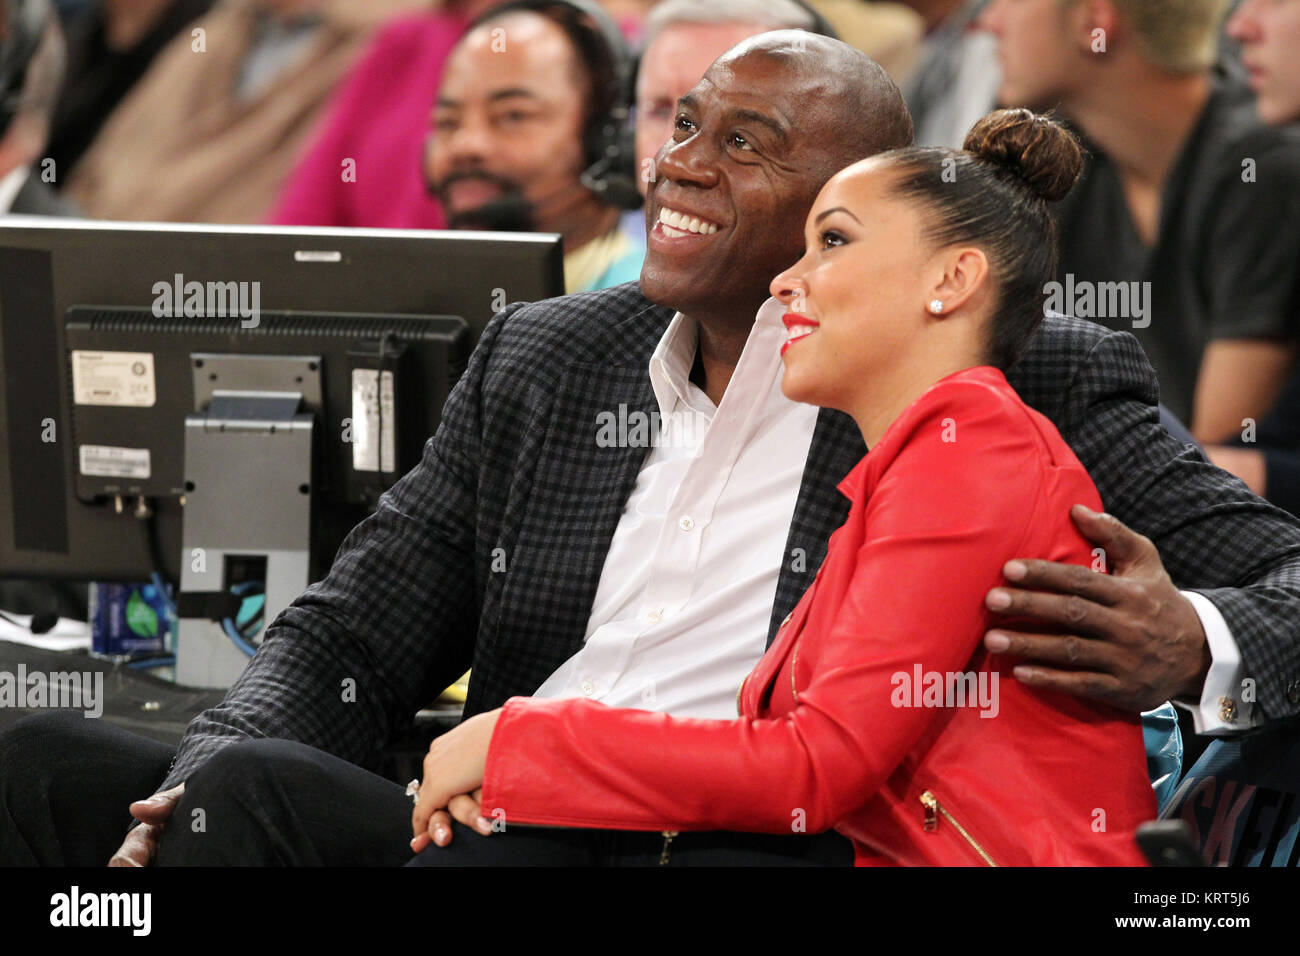 NEW YORK, NY - NOVEMBER 08: (Embargoed till November 10, 2015) Magic Johnson, Tracy Morgan with wife Megan Wollover sit with Michael K. Williams and  Director Spike Lee at the New York Knicks vs Los Angeles Lakers game at Madison Square Garden on November 8, 2015 in New York City.   People:  Magic Johnson, Megan Wollover Stock Photo